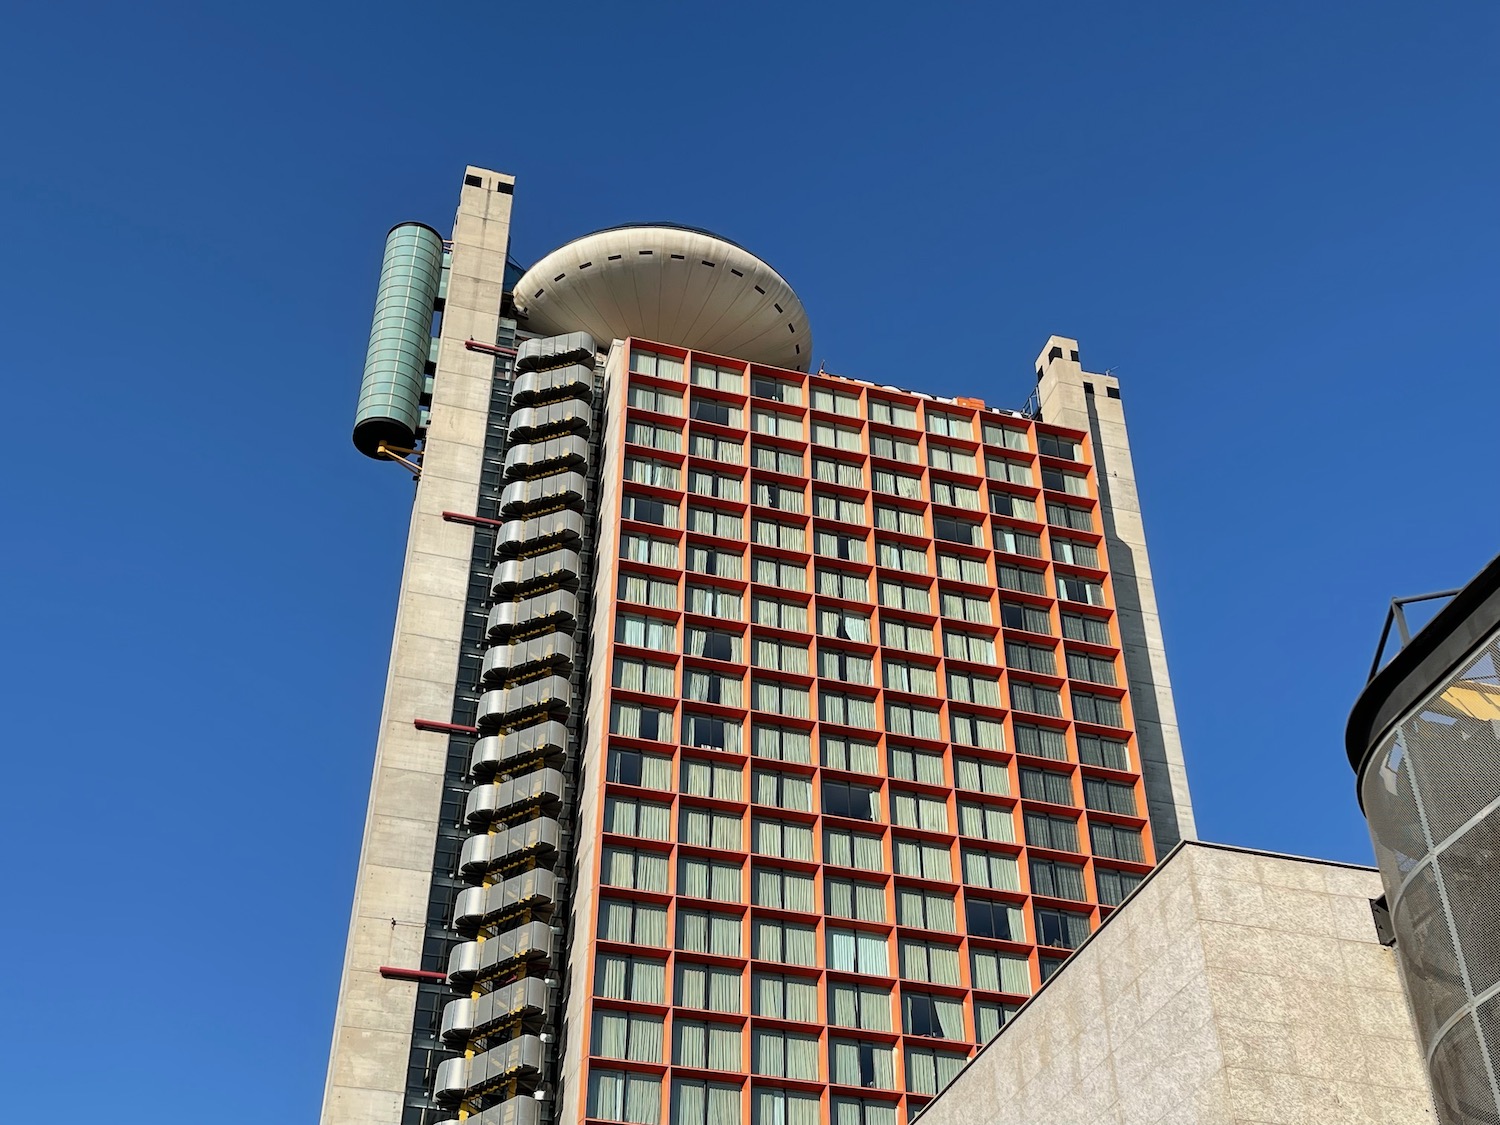 a tall building with a round object on top